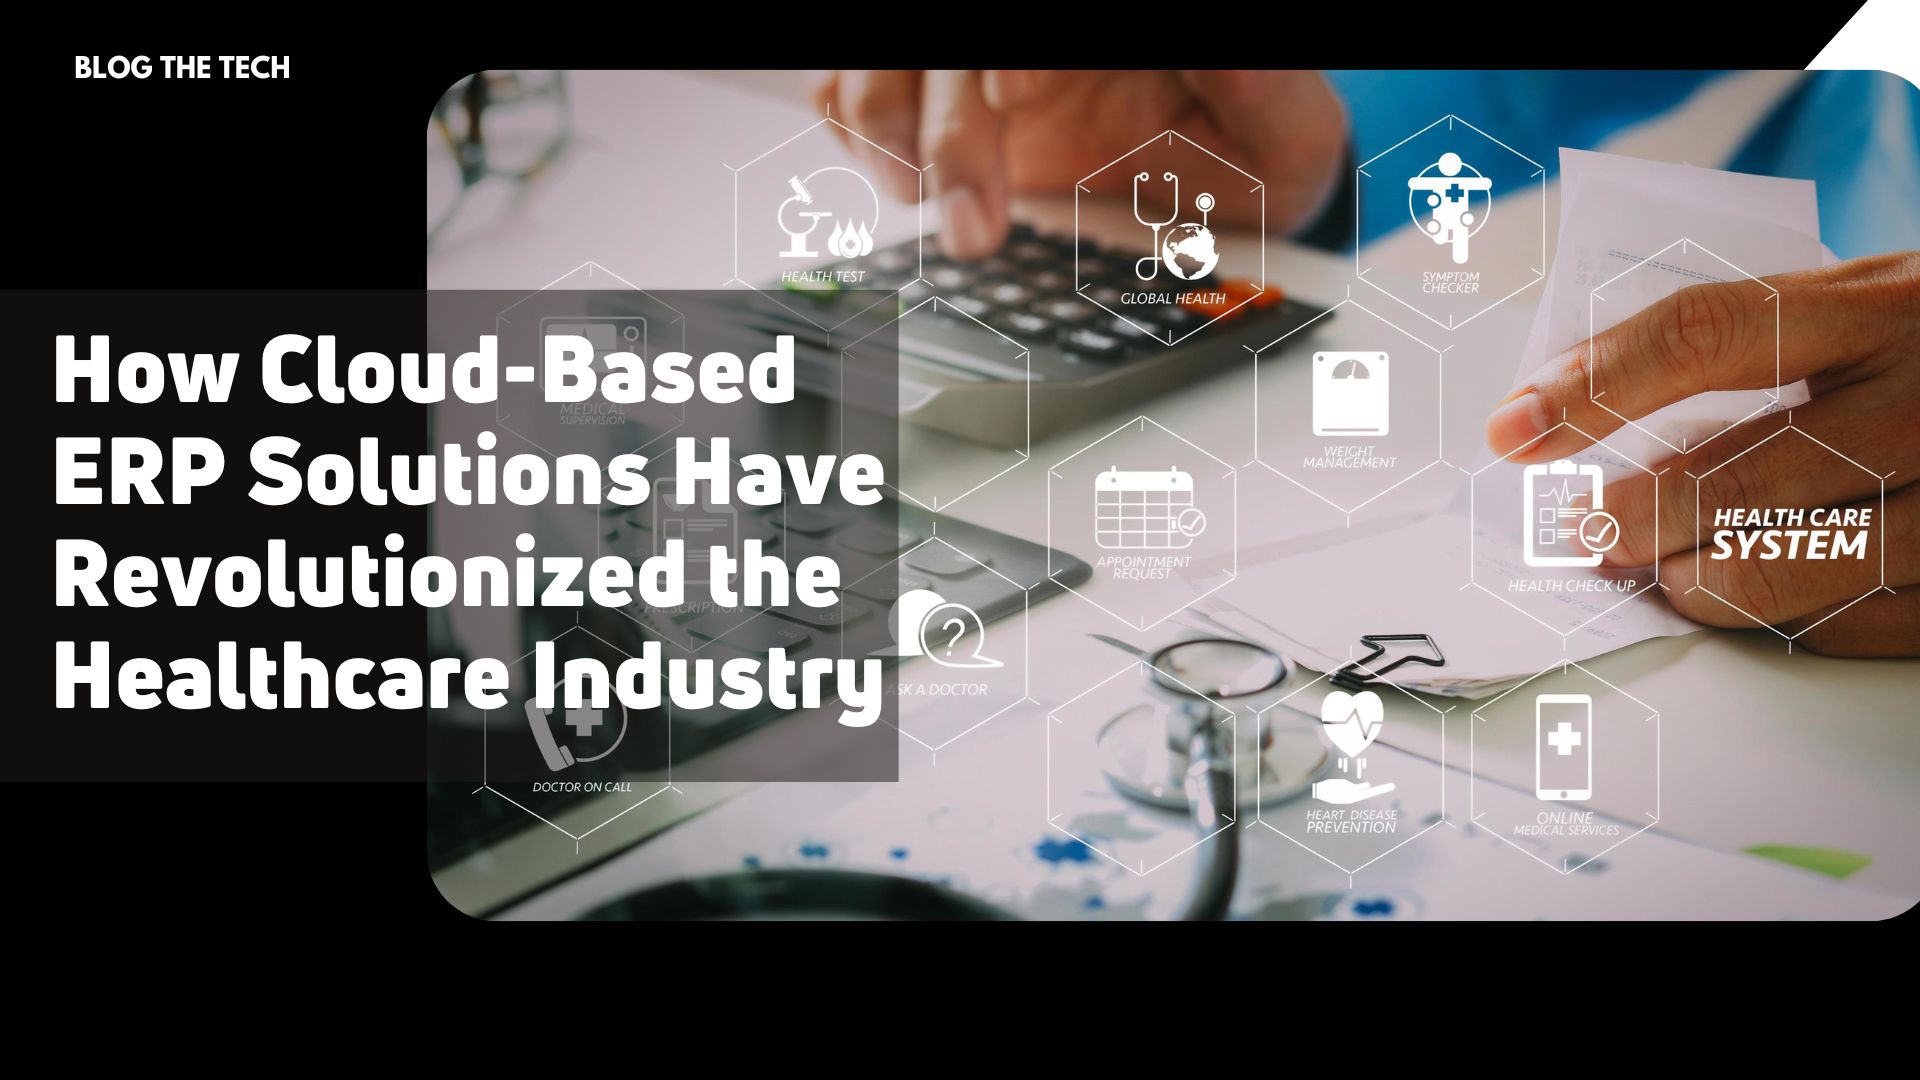 How Cloud Based ERP Solutions Have Revolutionized the Healthcare Industry